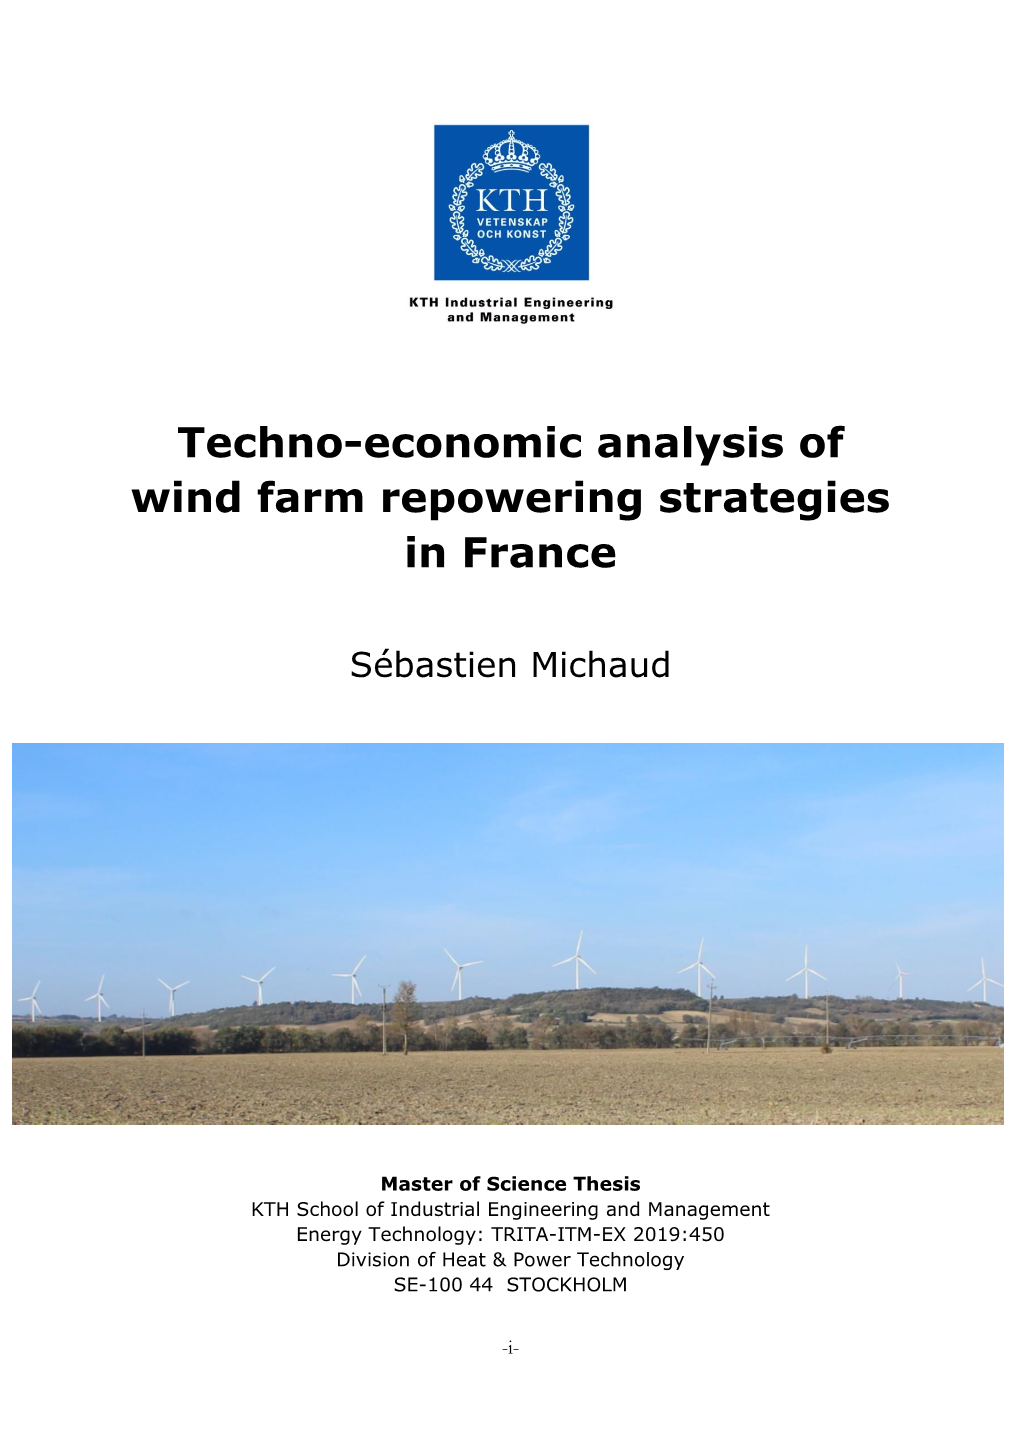 Techno-Economic Analysis of Wind Farm Repowering Strategies in France